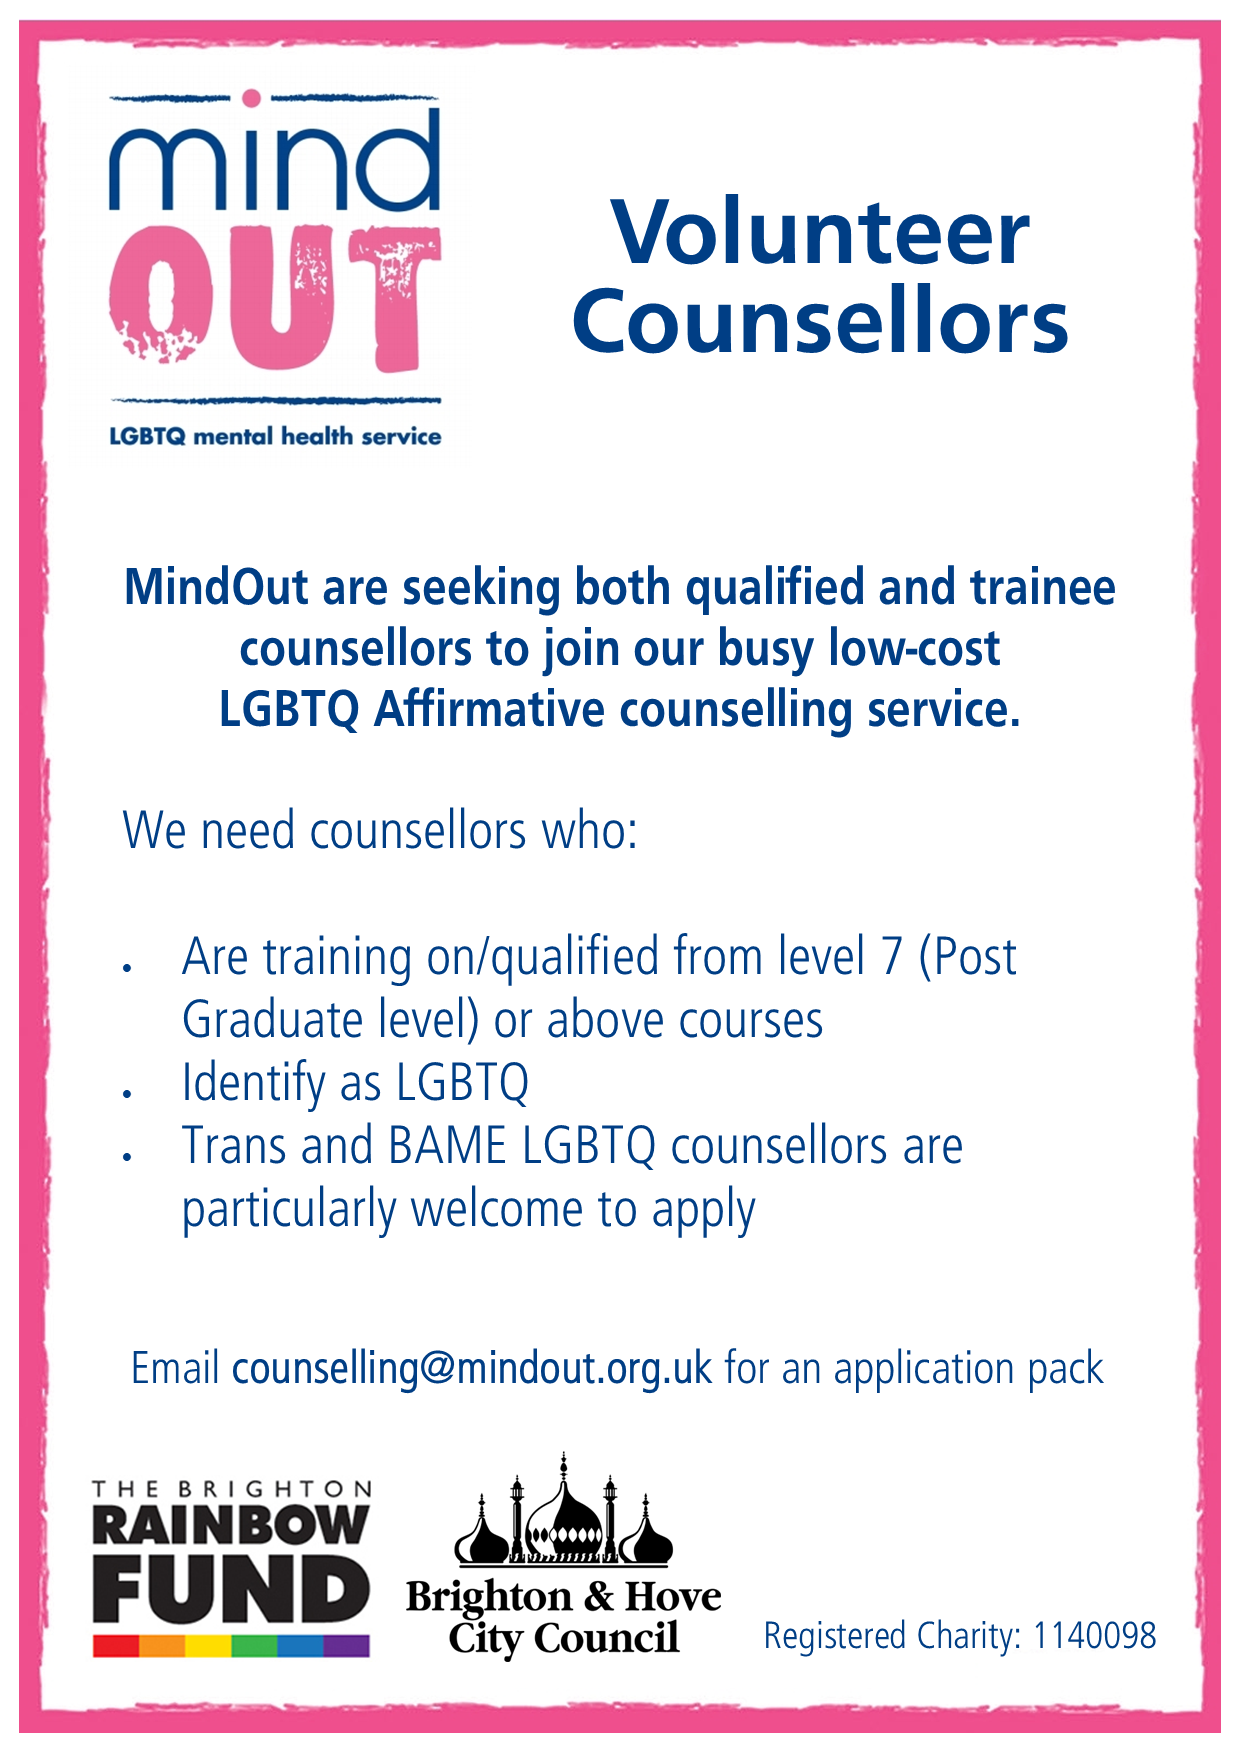 Image has a pink border, and features the MindOut logo. It gives details of the volunteer vacancy, and includes details of the post. There is a paragraph of text in the centre describing what kind of experience and qualities are required for the post. Bottom of the image includes the MindOut charity number and the rainbow fund and brighton and hove city councils logos.